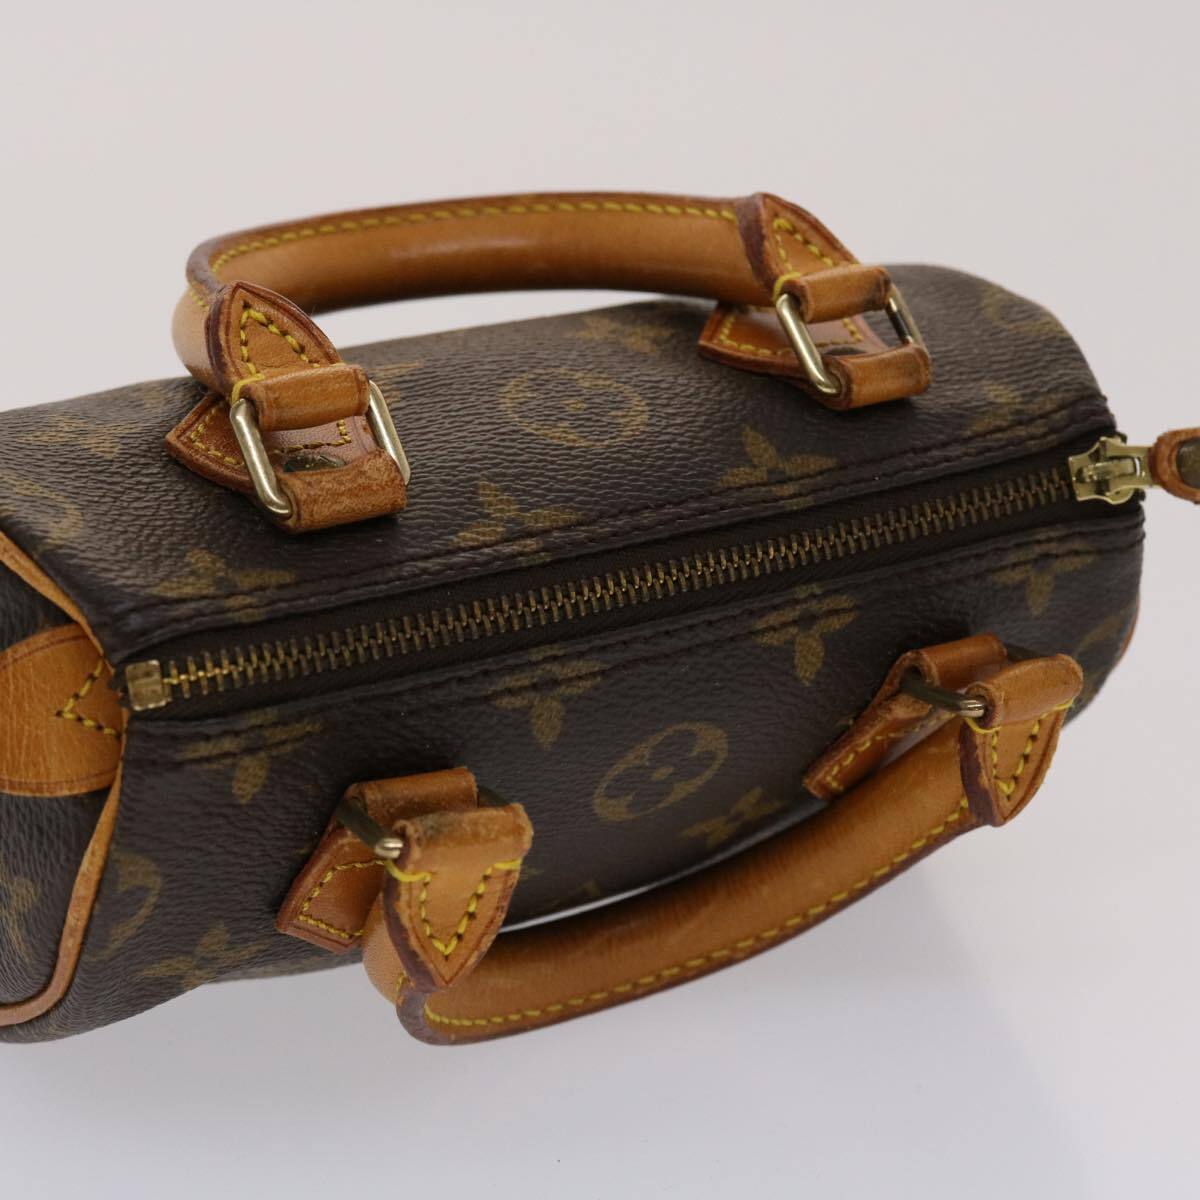 WHAT FITS IN LOUIS VUITTON MINI SPEEDY VINTAGE EDITION 